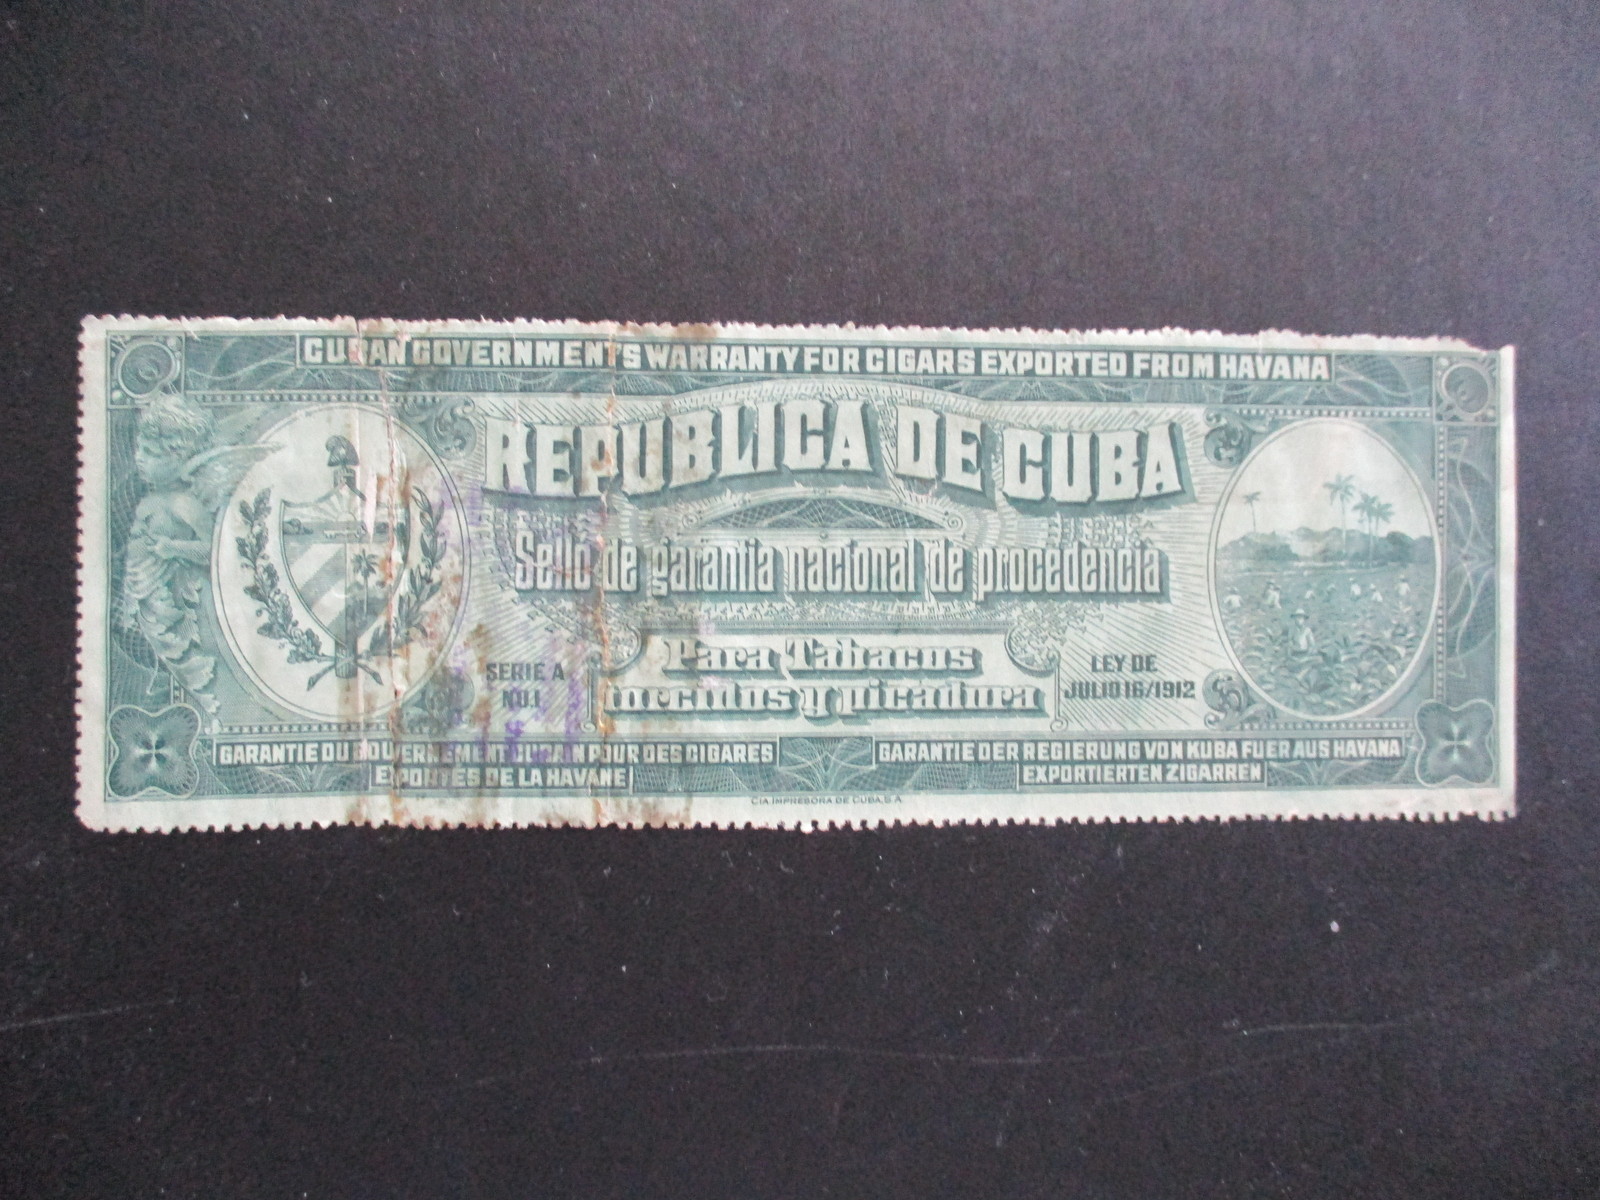 Primary image for VINTAGE AUTHENTIC CUBAN GOVERNMENT'S WARRANTY FOR EXPORTED CIGARS FROM HAVANA